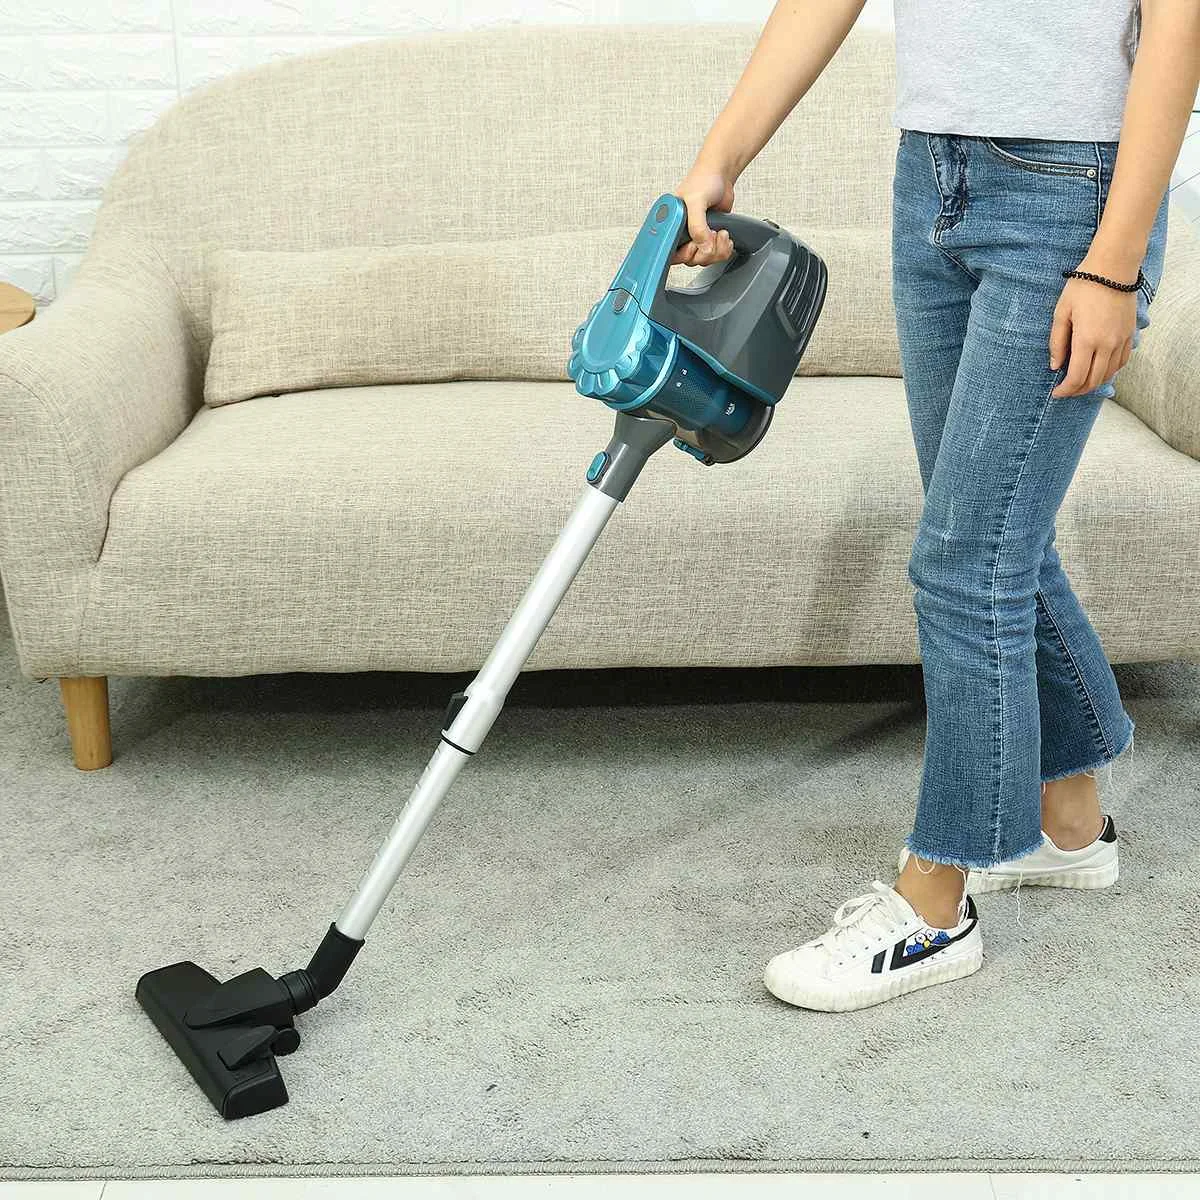 

Wired/Wireless Handheld Vacuum Cleaner 15000pa Strong Suction Power Hand Stick with Dustbin Vacuum Cleaners Home Dust Collector